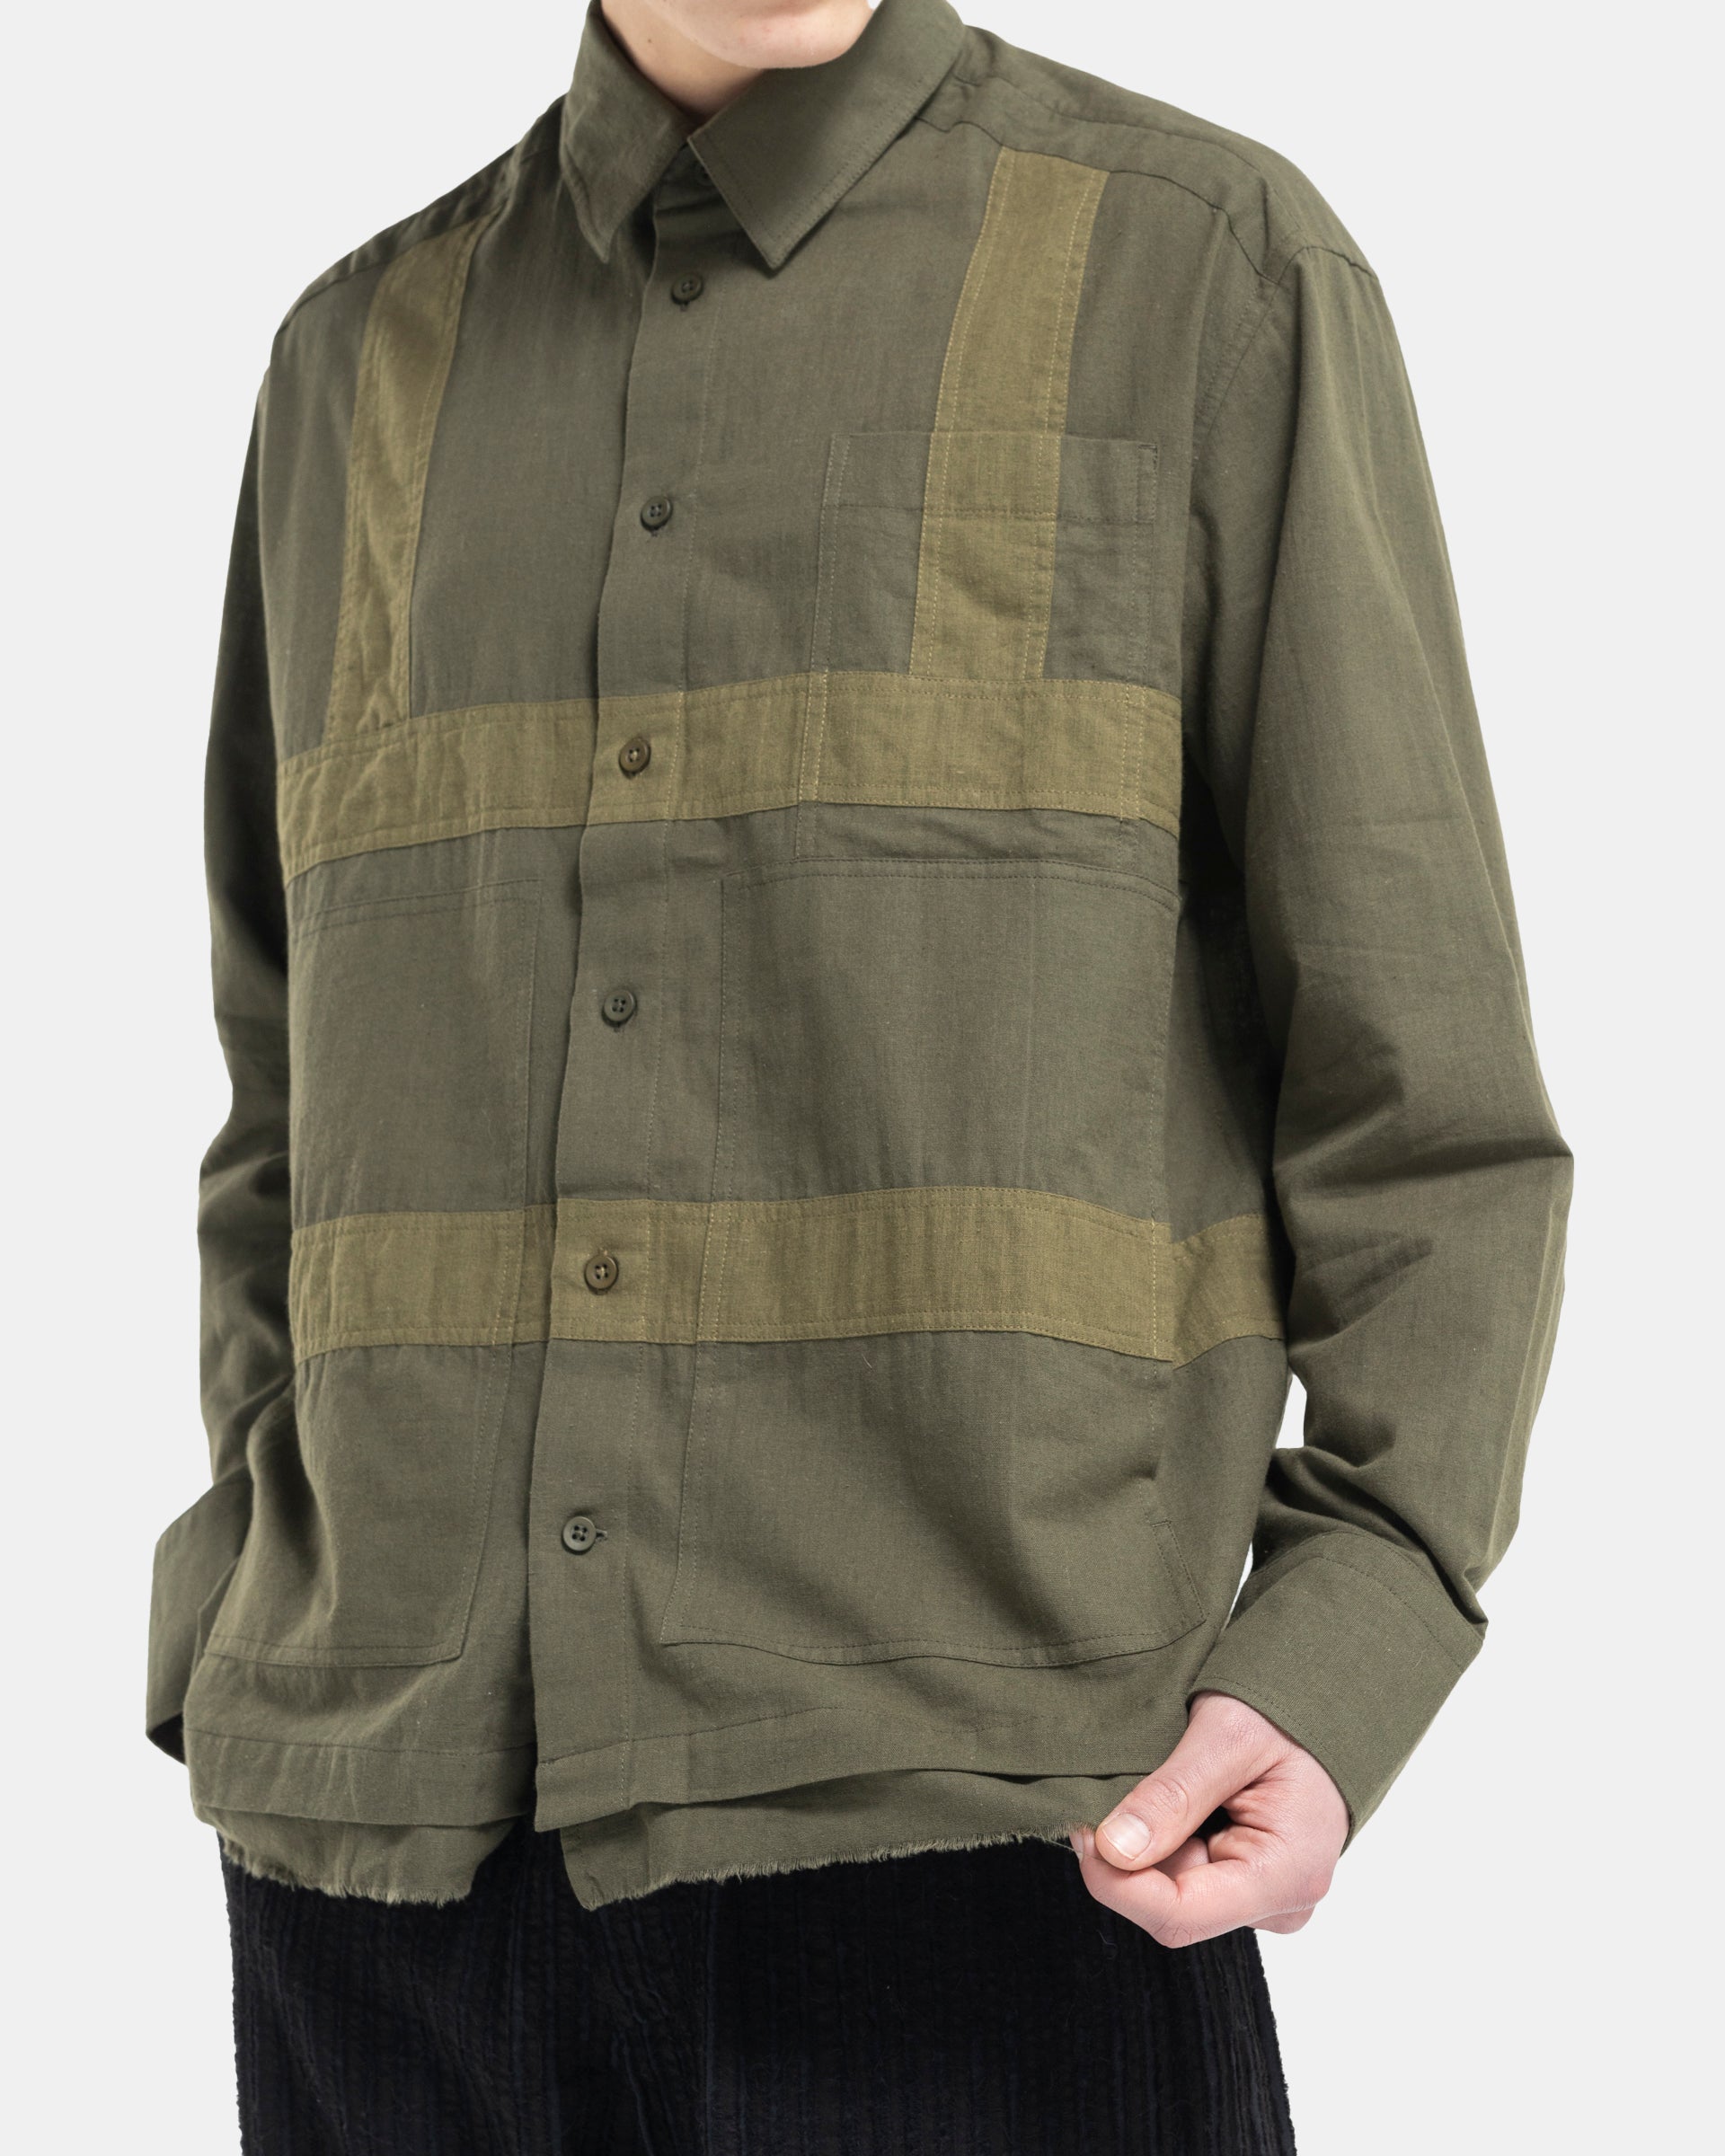 Harness Shirt in Olive